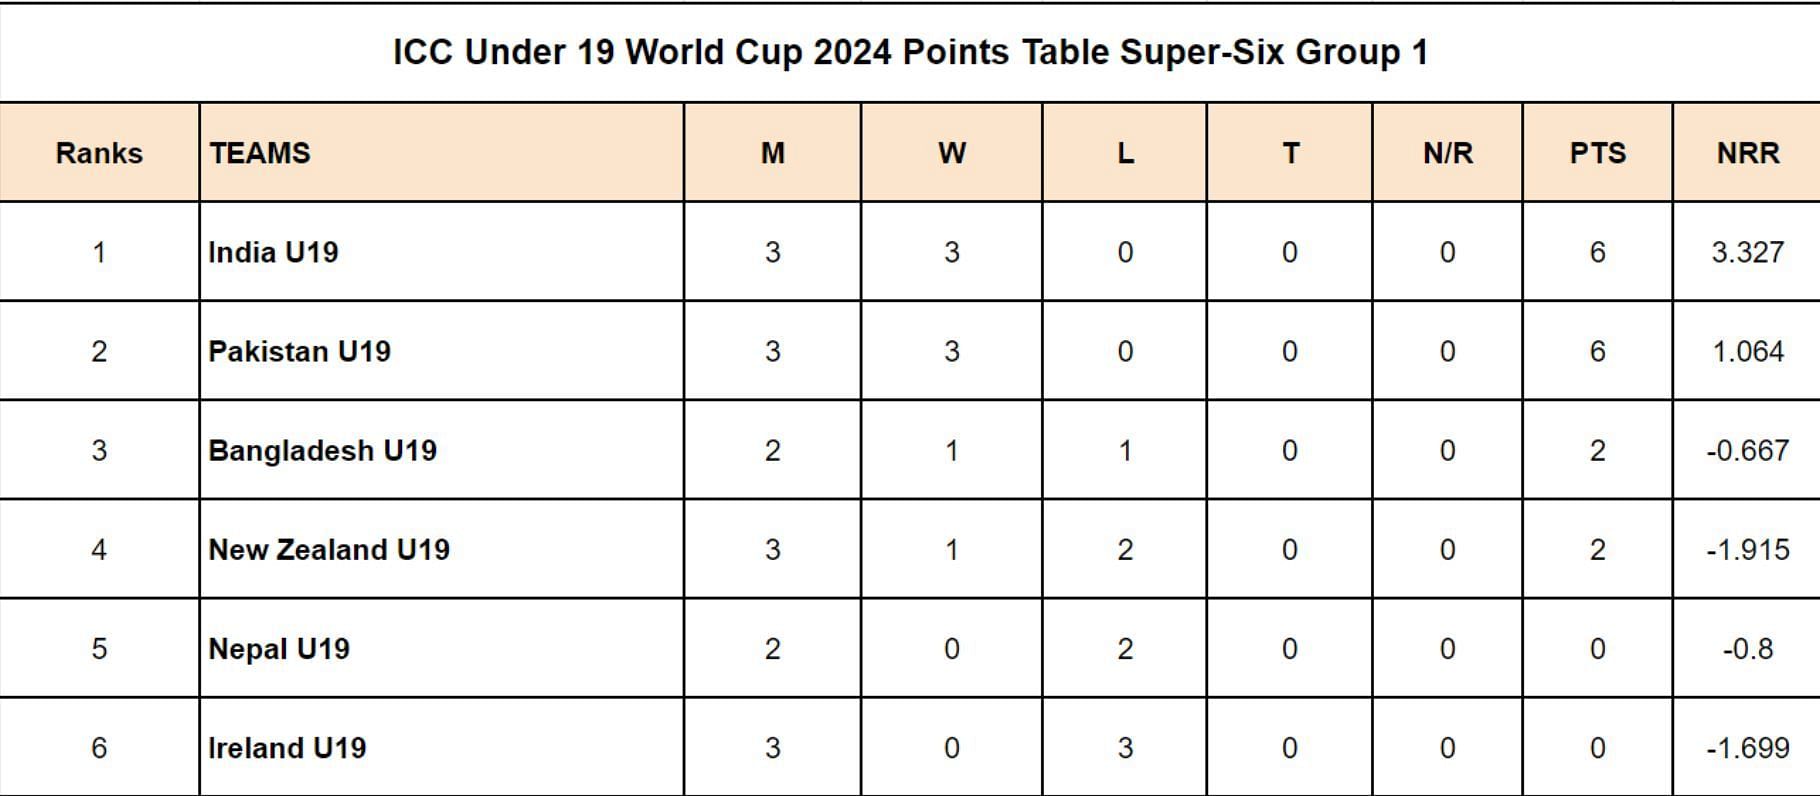 ICC Under 19 World Cup 2024 Points Table Super-Six Group 1